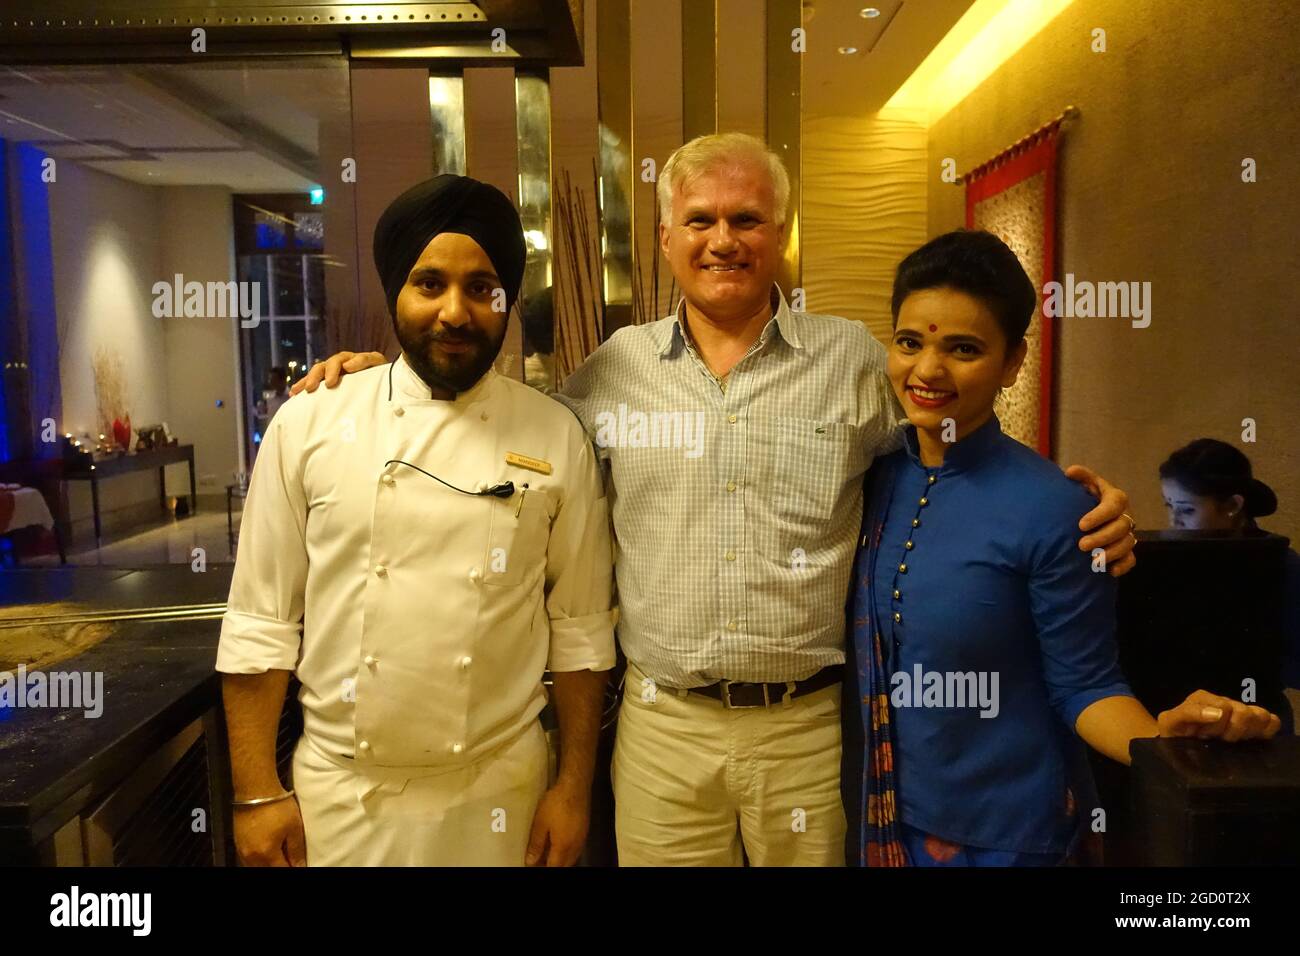 UK Actor Alan Carter poses with the Cook and Hostess at the Ananta Indian Restaurant of The Oberoi Hotel in Dubai, UAE Stock Photo